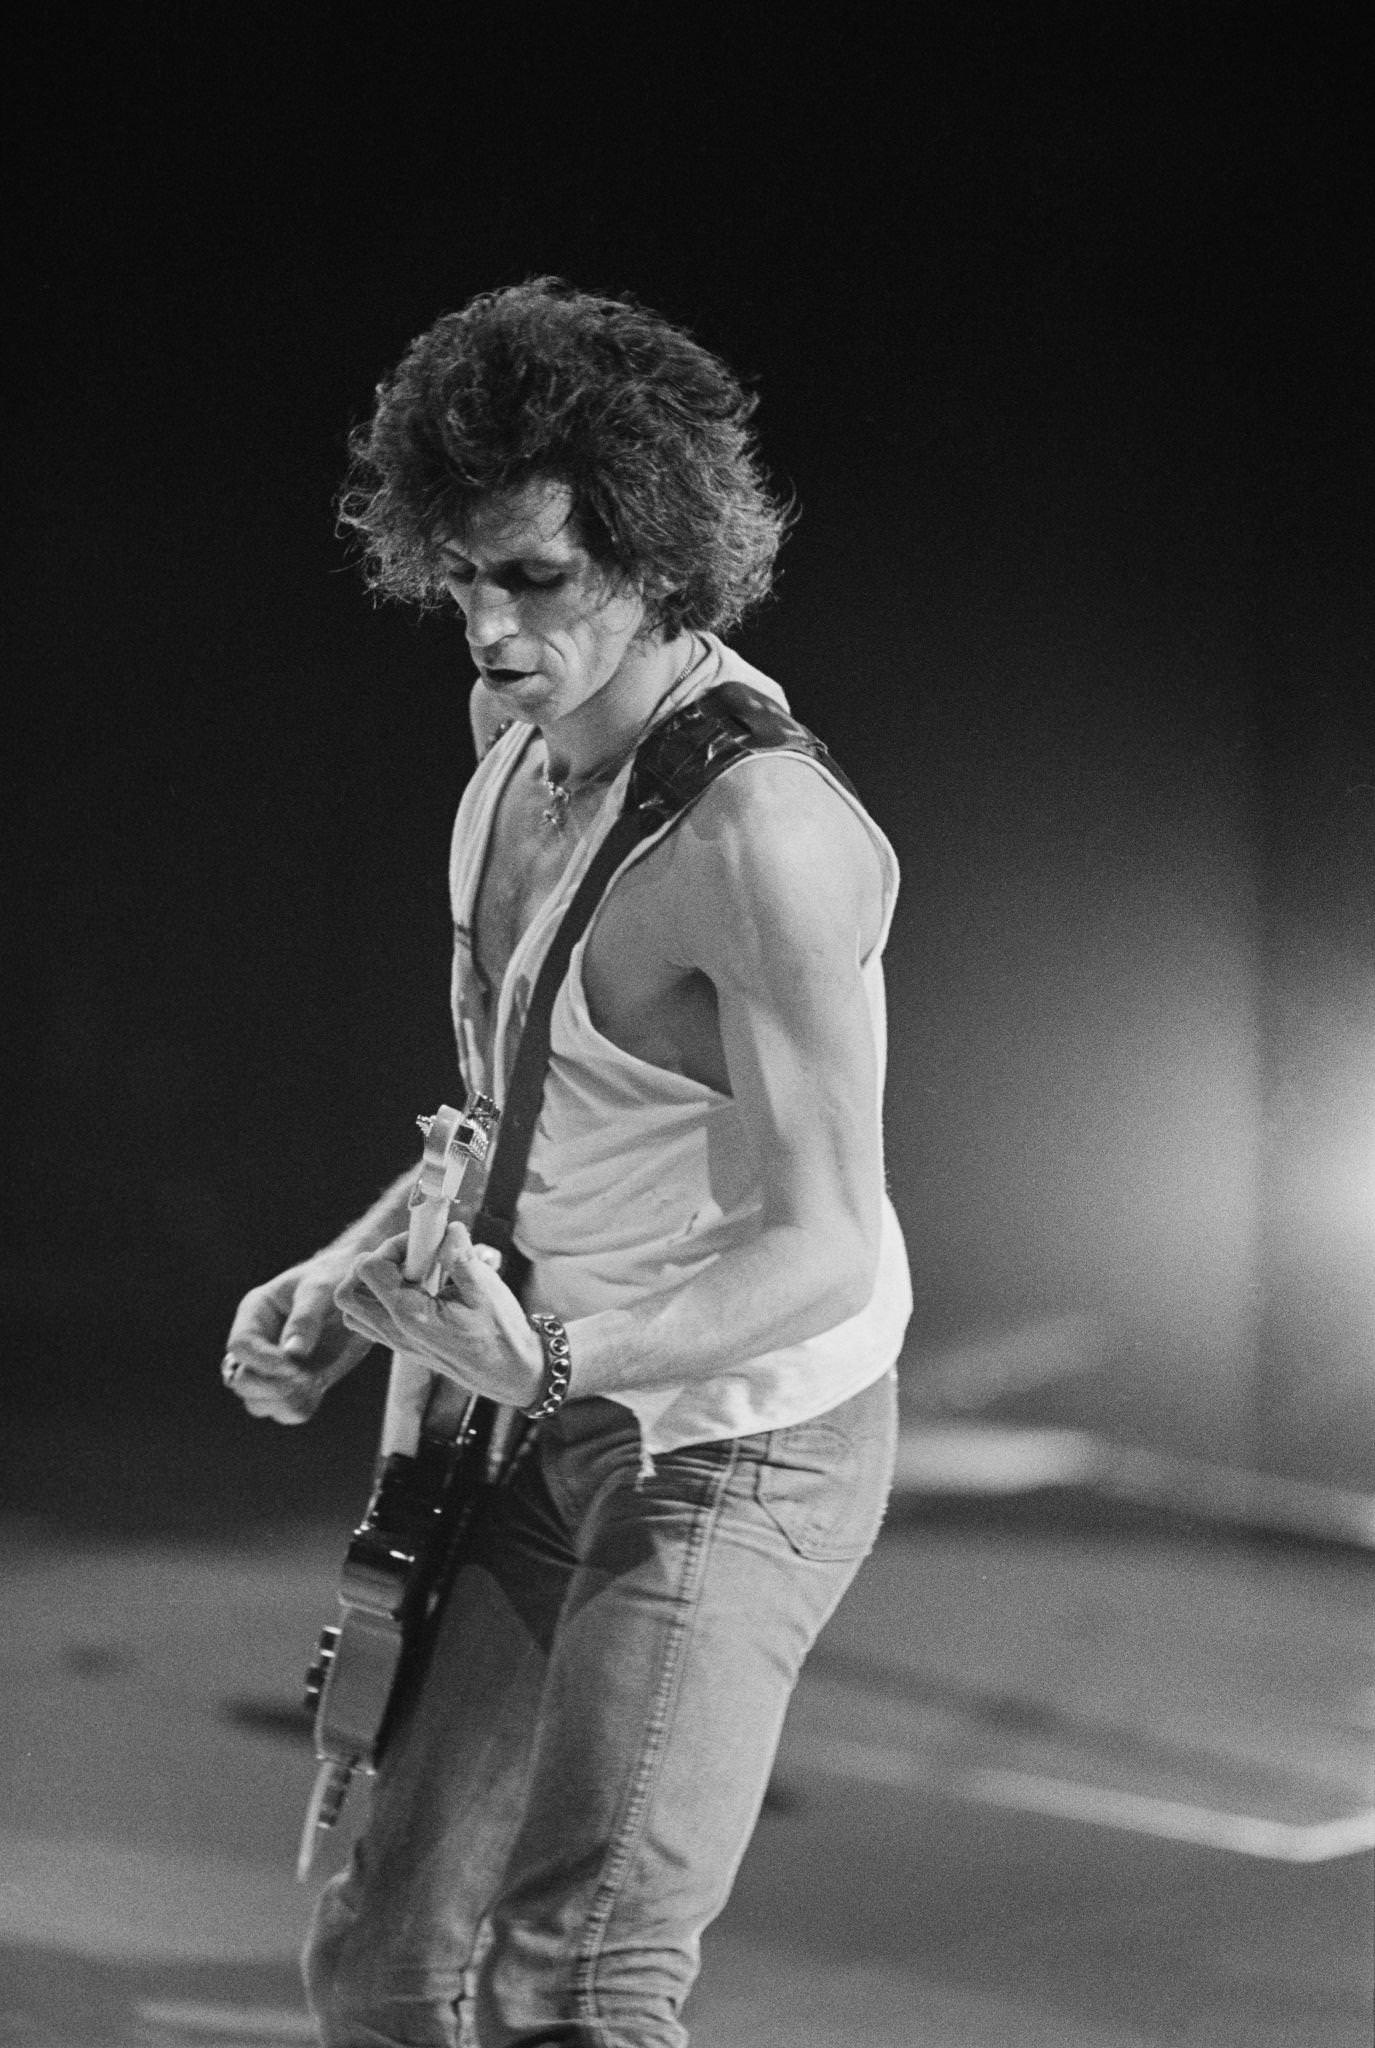 Keith Richards, wearing a ripped vest, performs with The Rolling Stones , 1975.